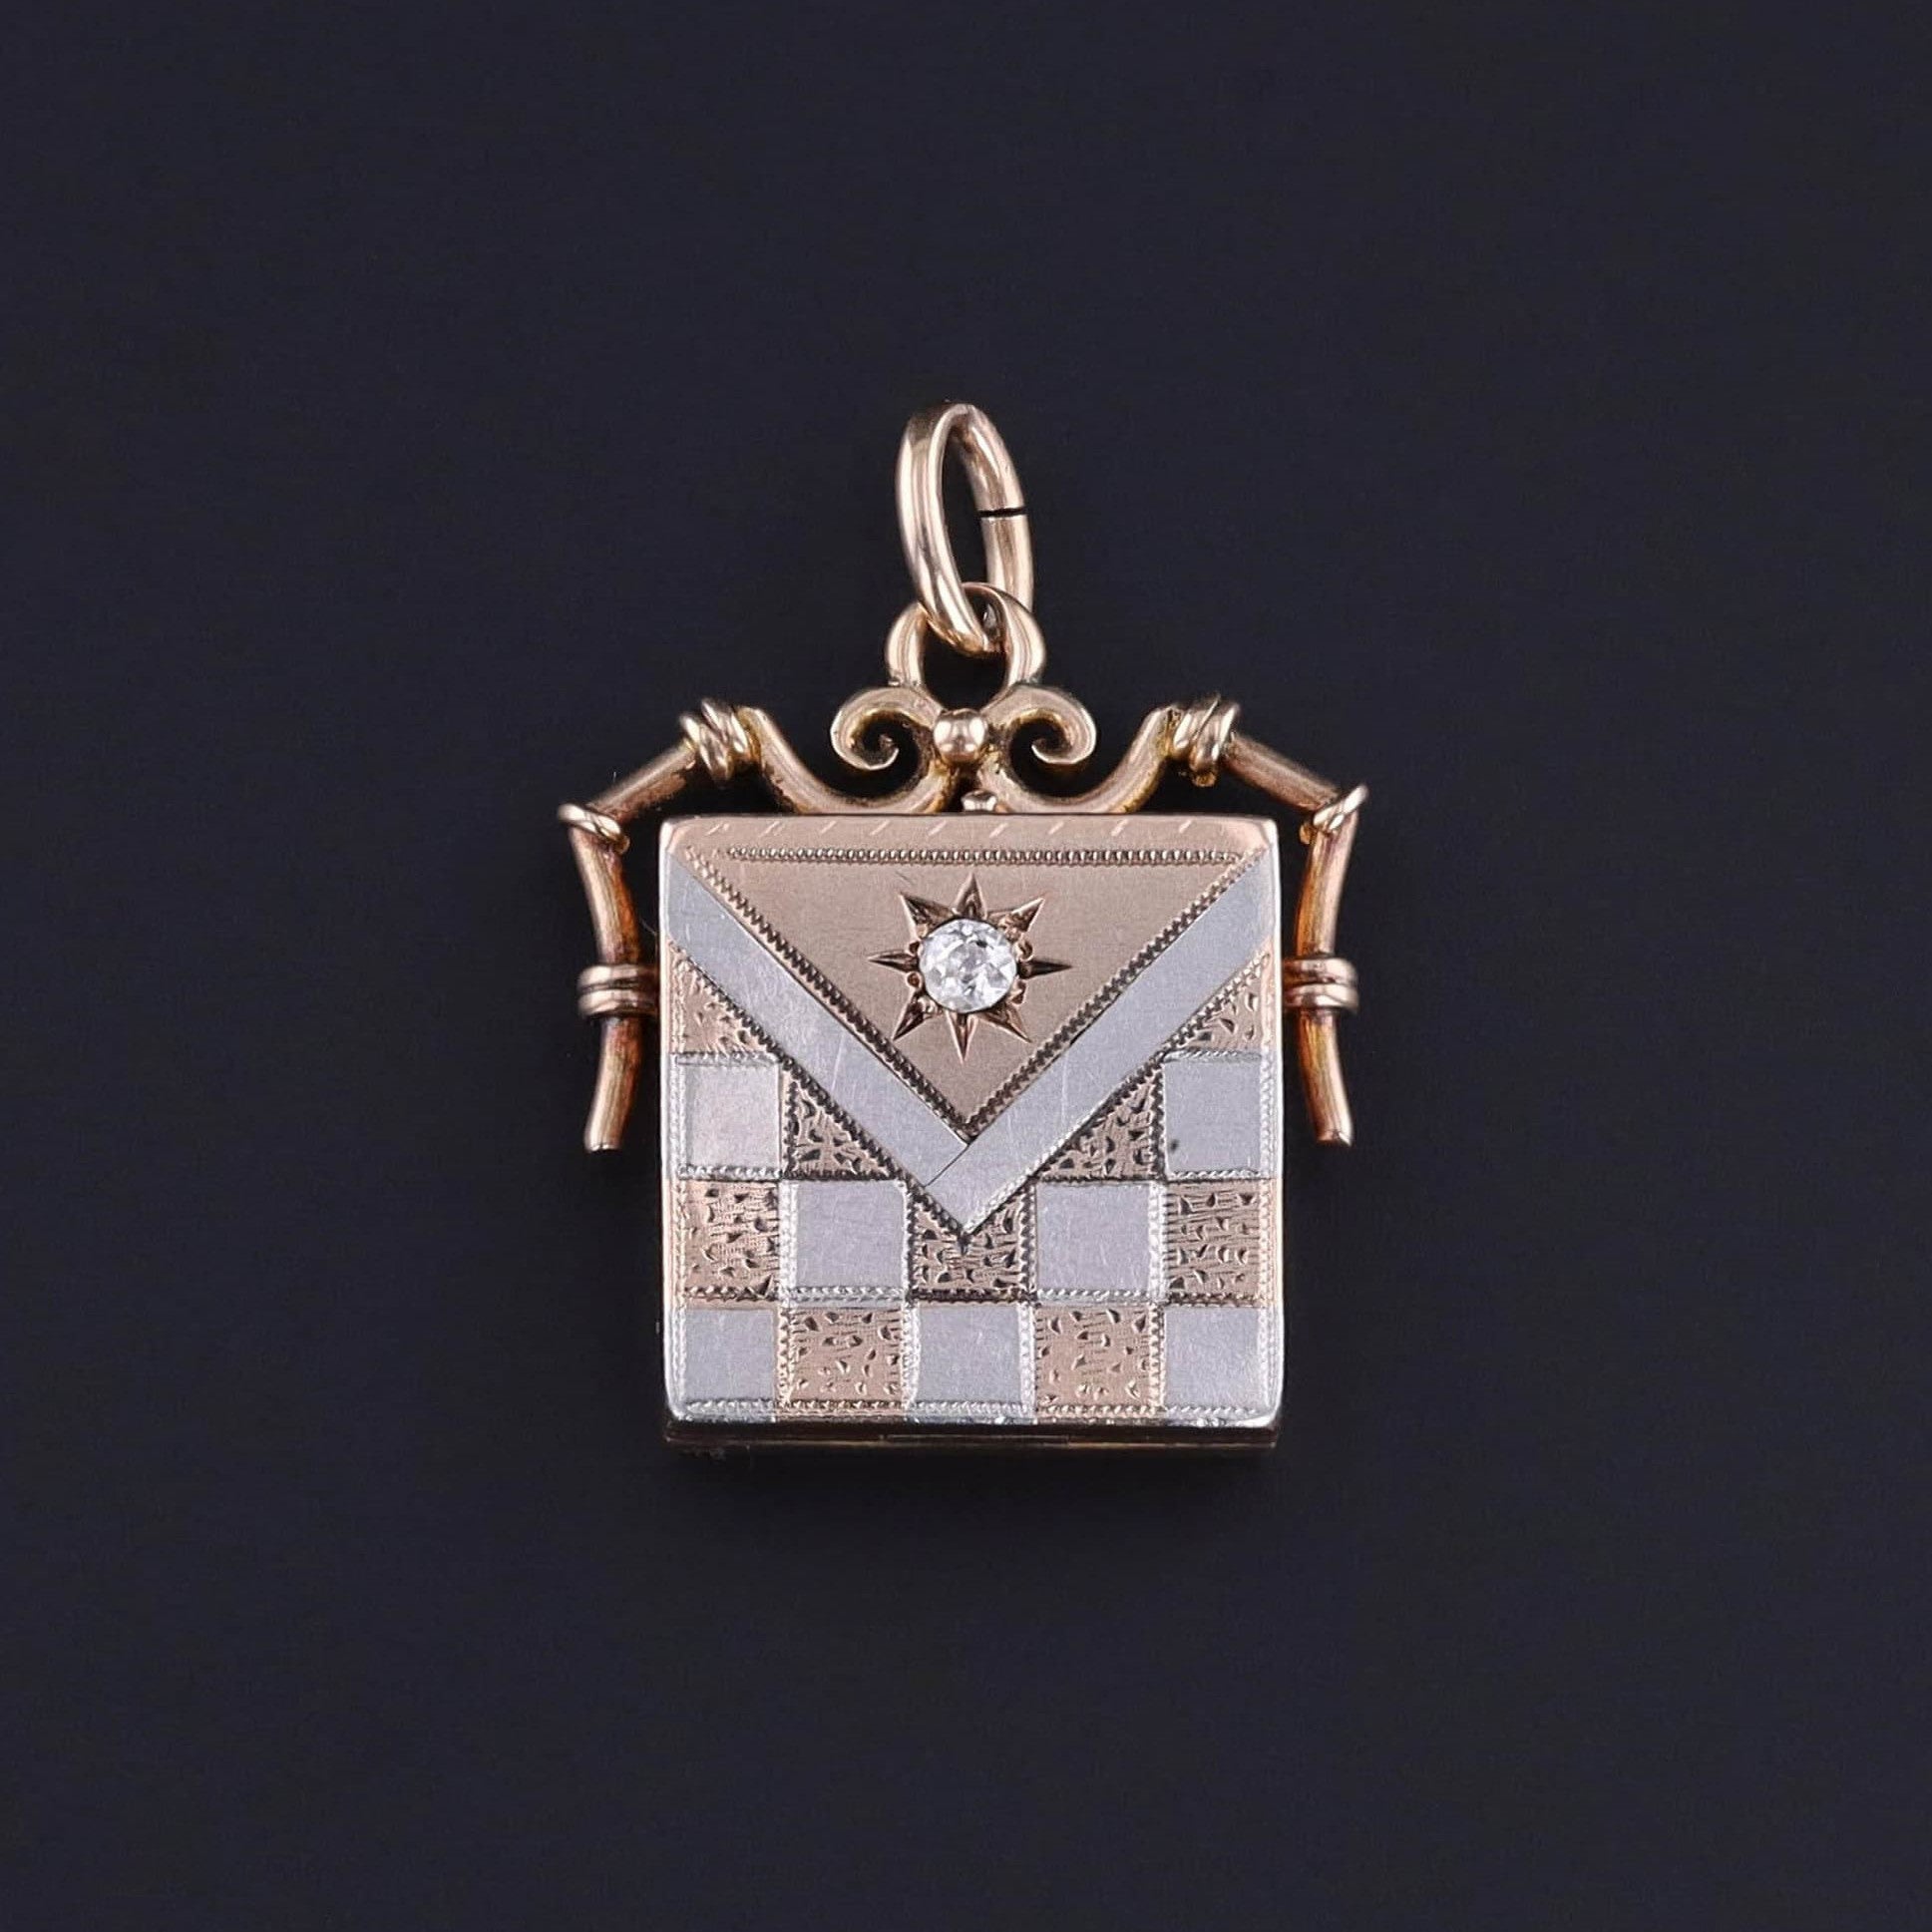 A fine antique locket from the early 20th century circa 1900-1910. It is 10k rose gold and platinum with an old European cut diamond accent. It has an appearling hand etched checkerboard pattern. Perfect for any antique jewelry lover.